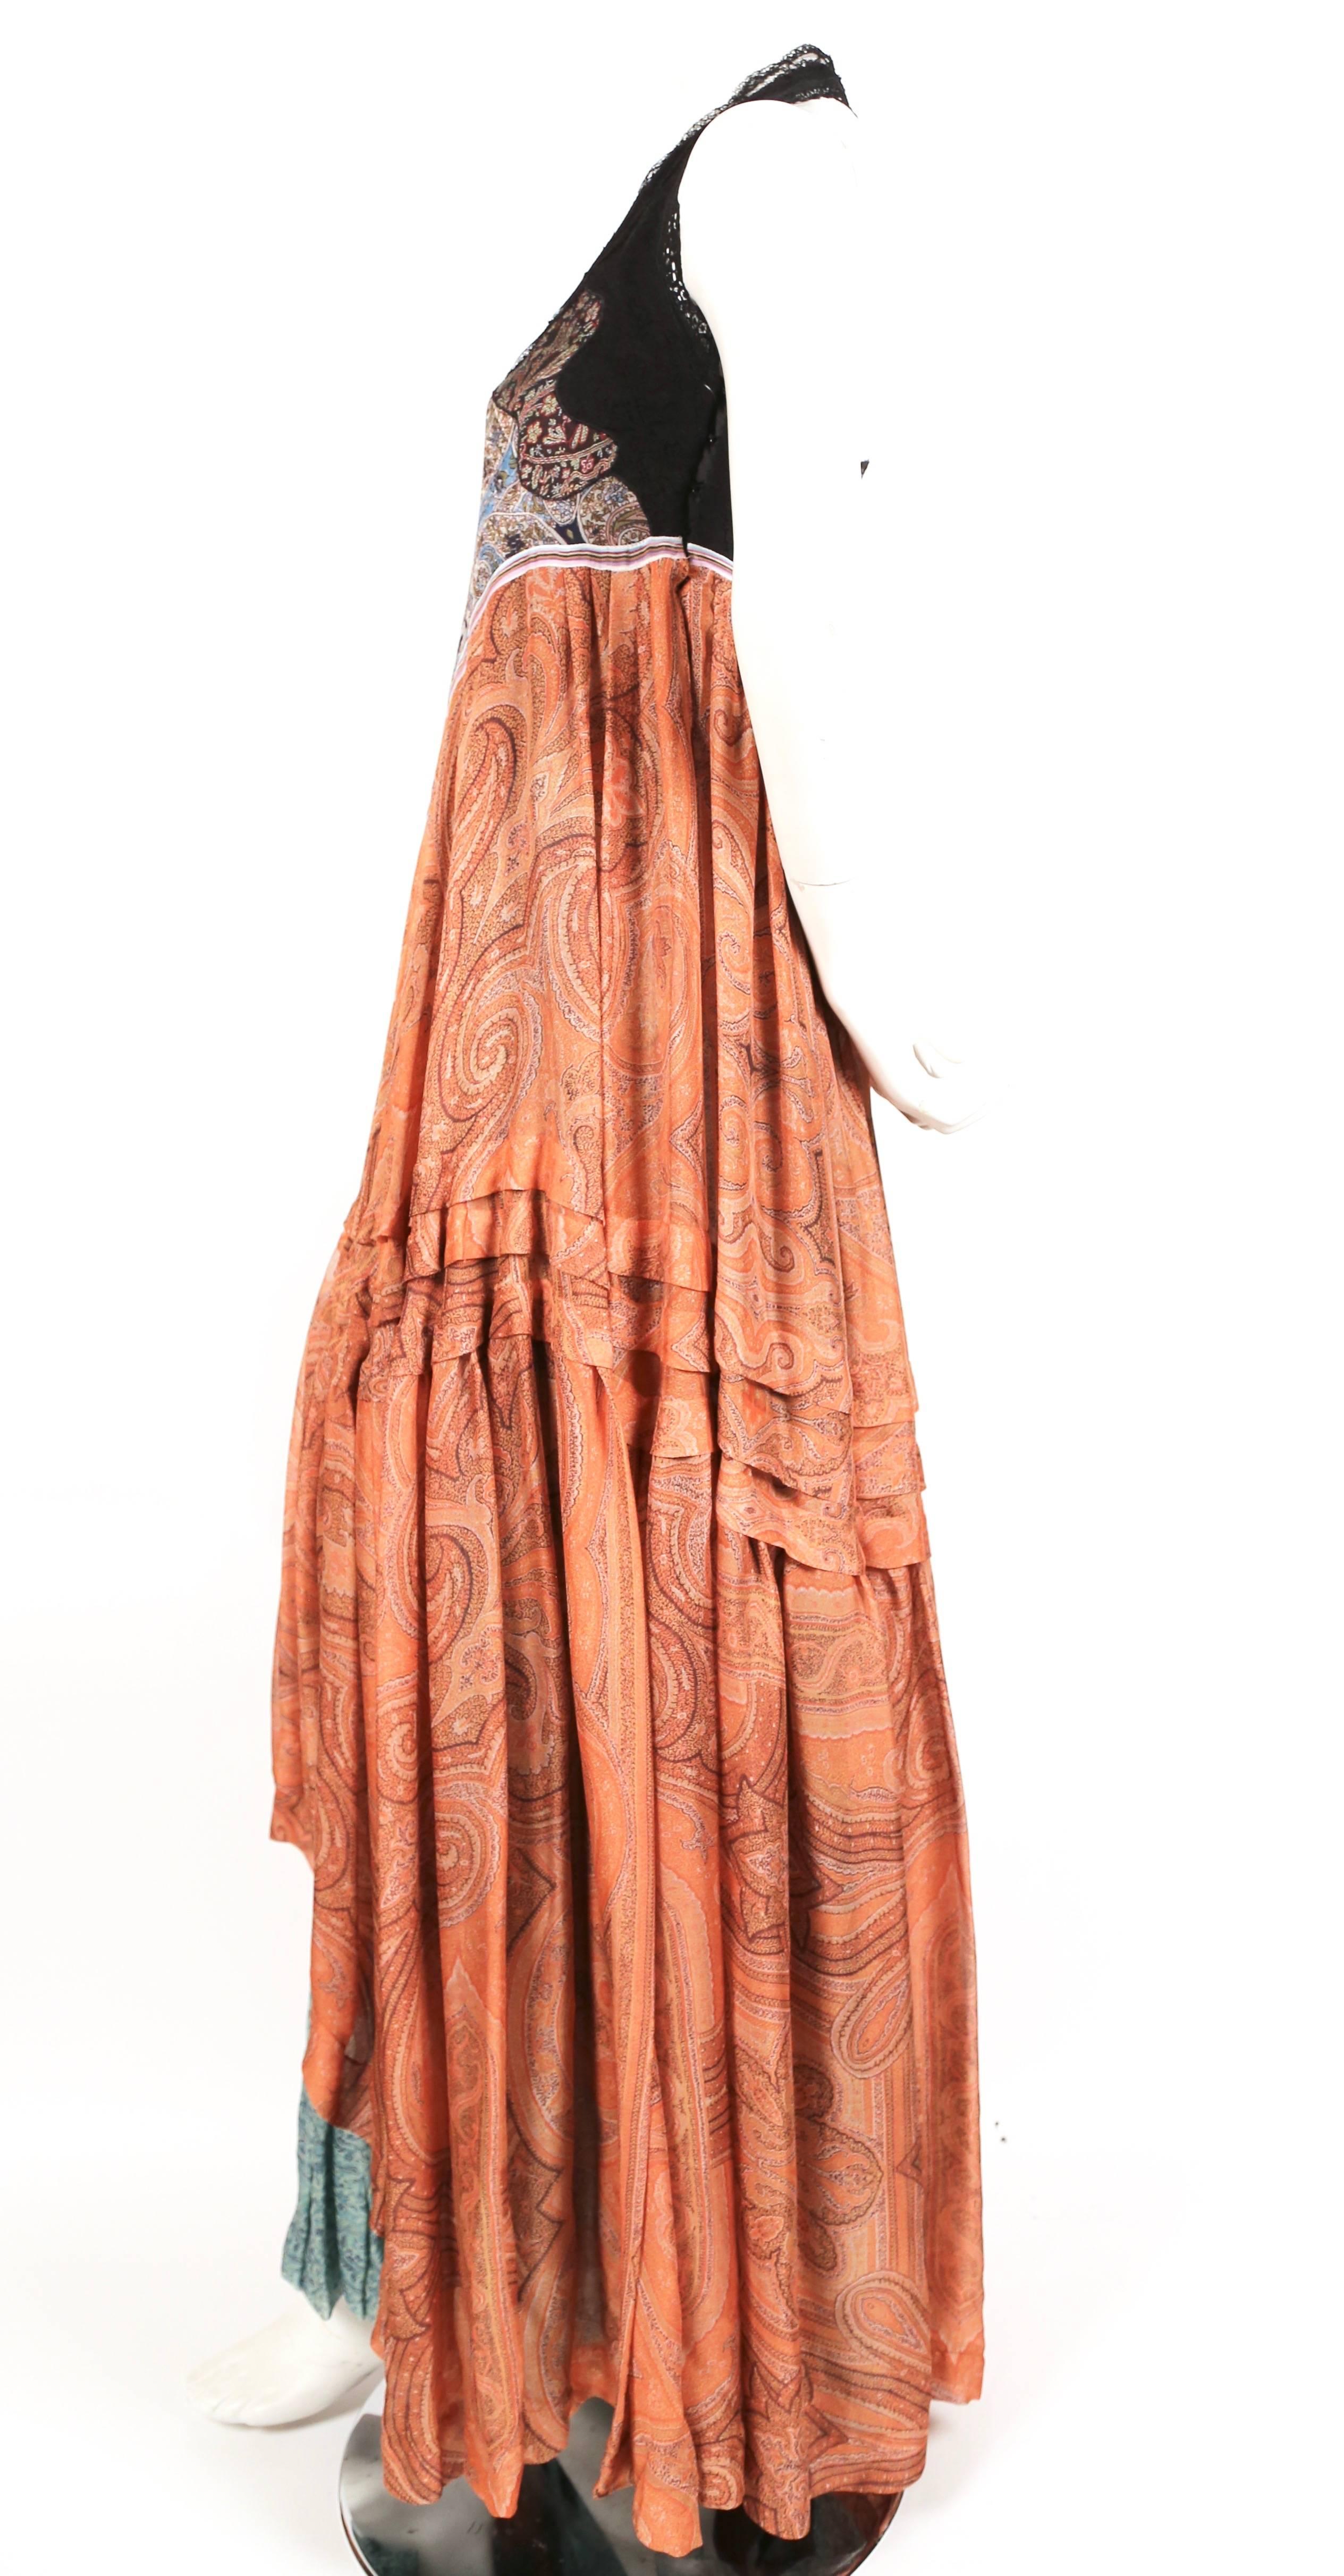 Very rare paisley printed silk dress with striped trim, ruffled hem and lace trim at neck designed by nicolas ghesquiere for Balenciaga dating to spring 2005. French size 36. Approximate measurements: bust 32" and length 46" (at front) and